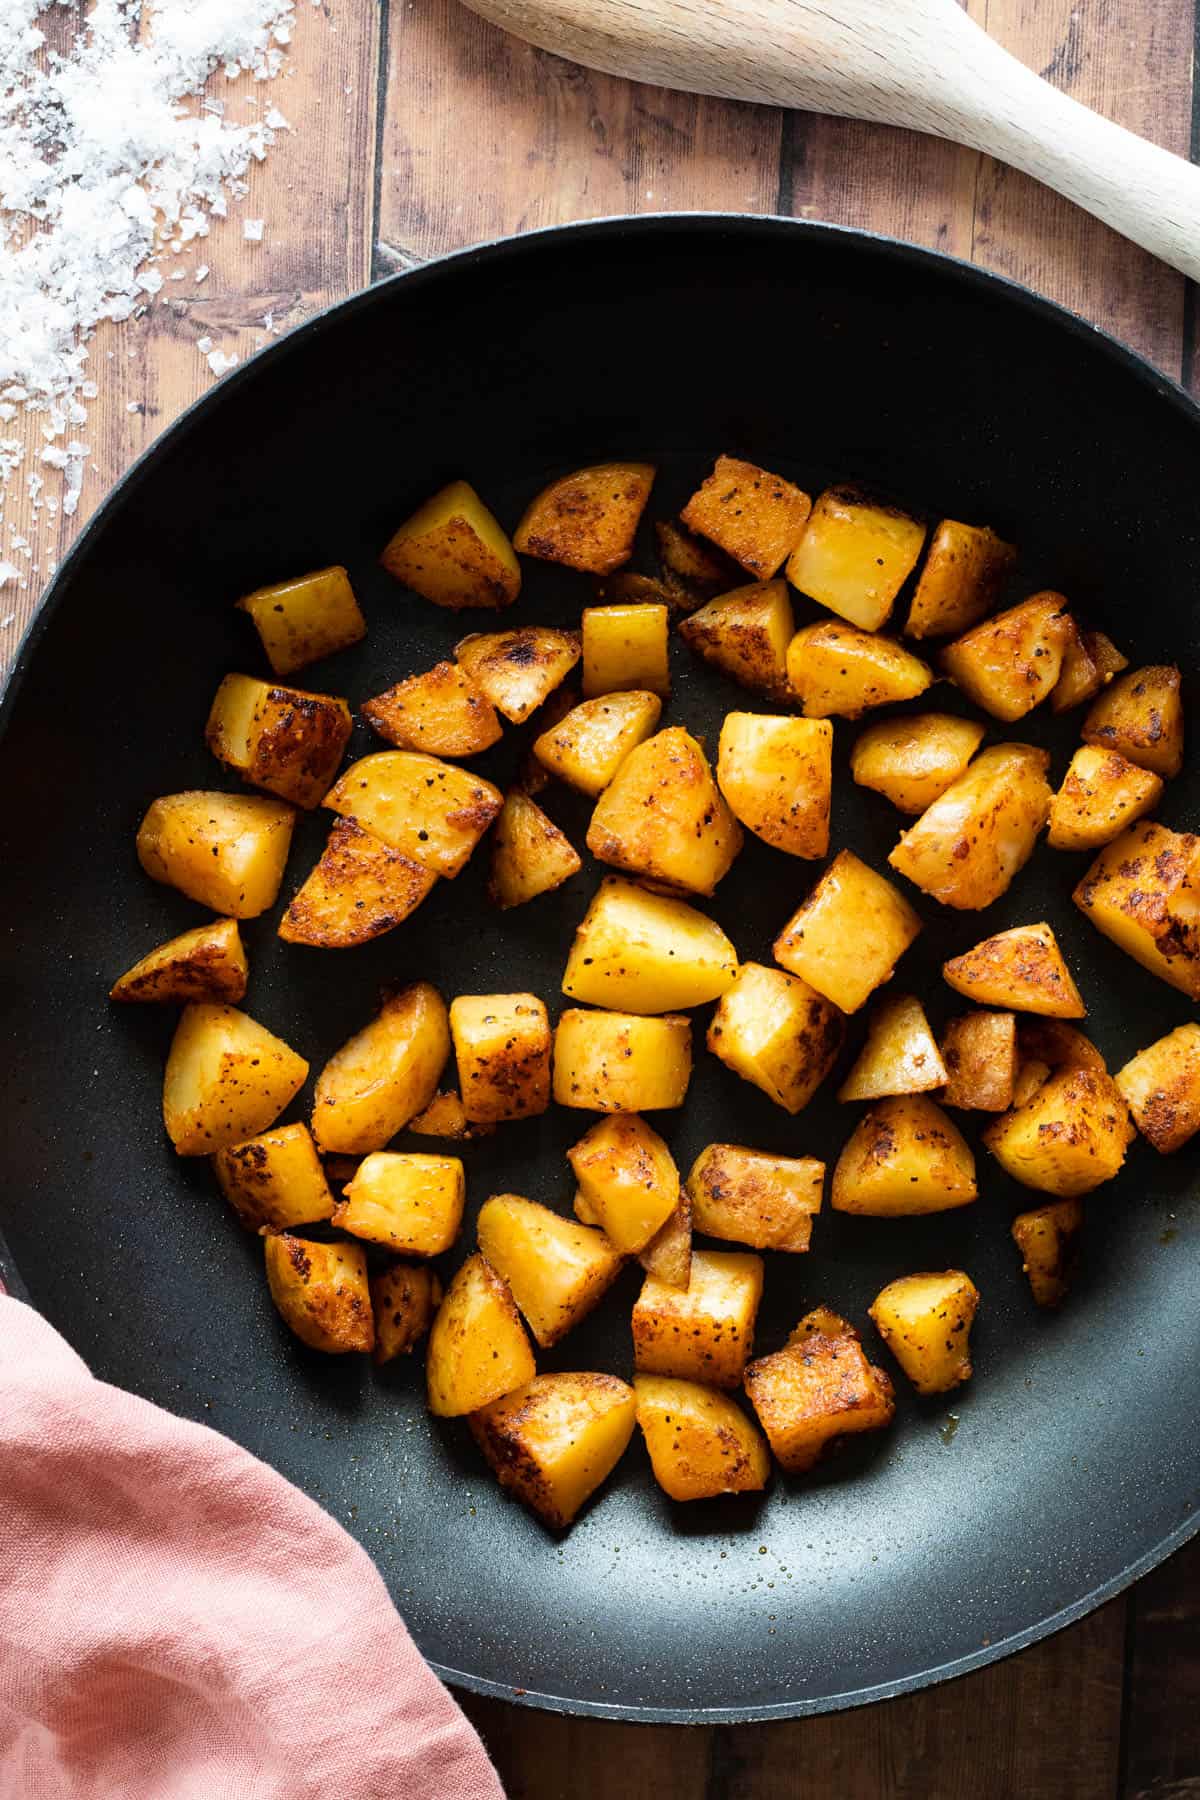 Country potatoes in a skillet.